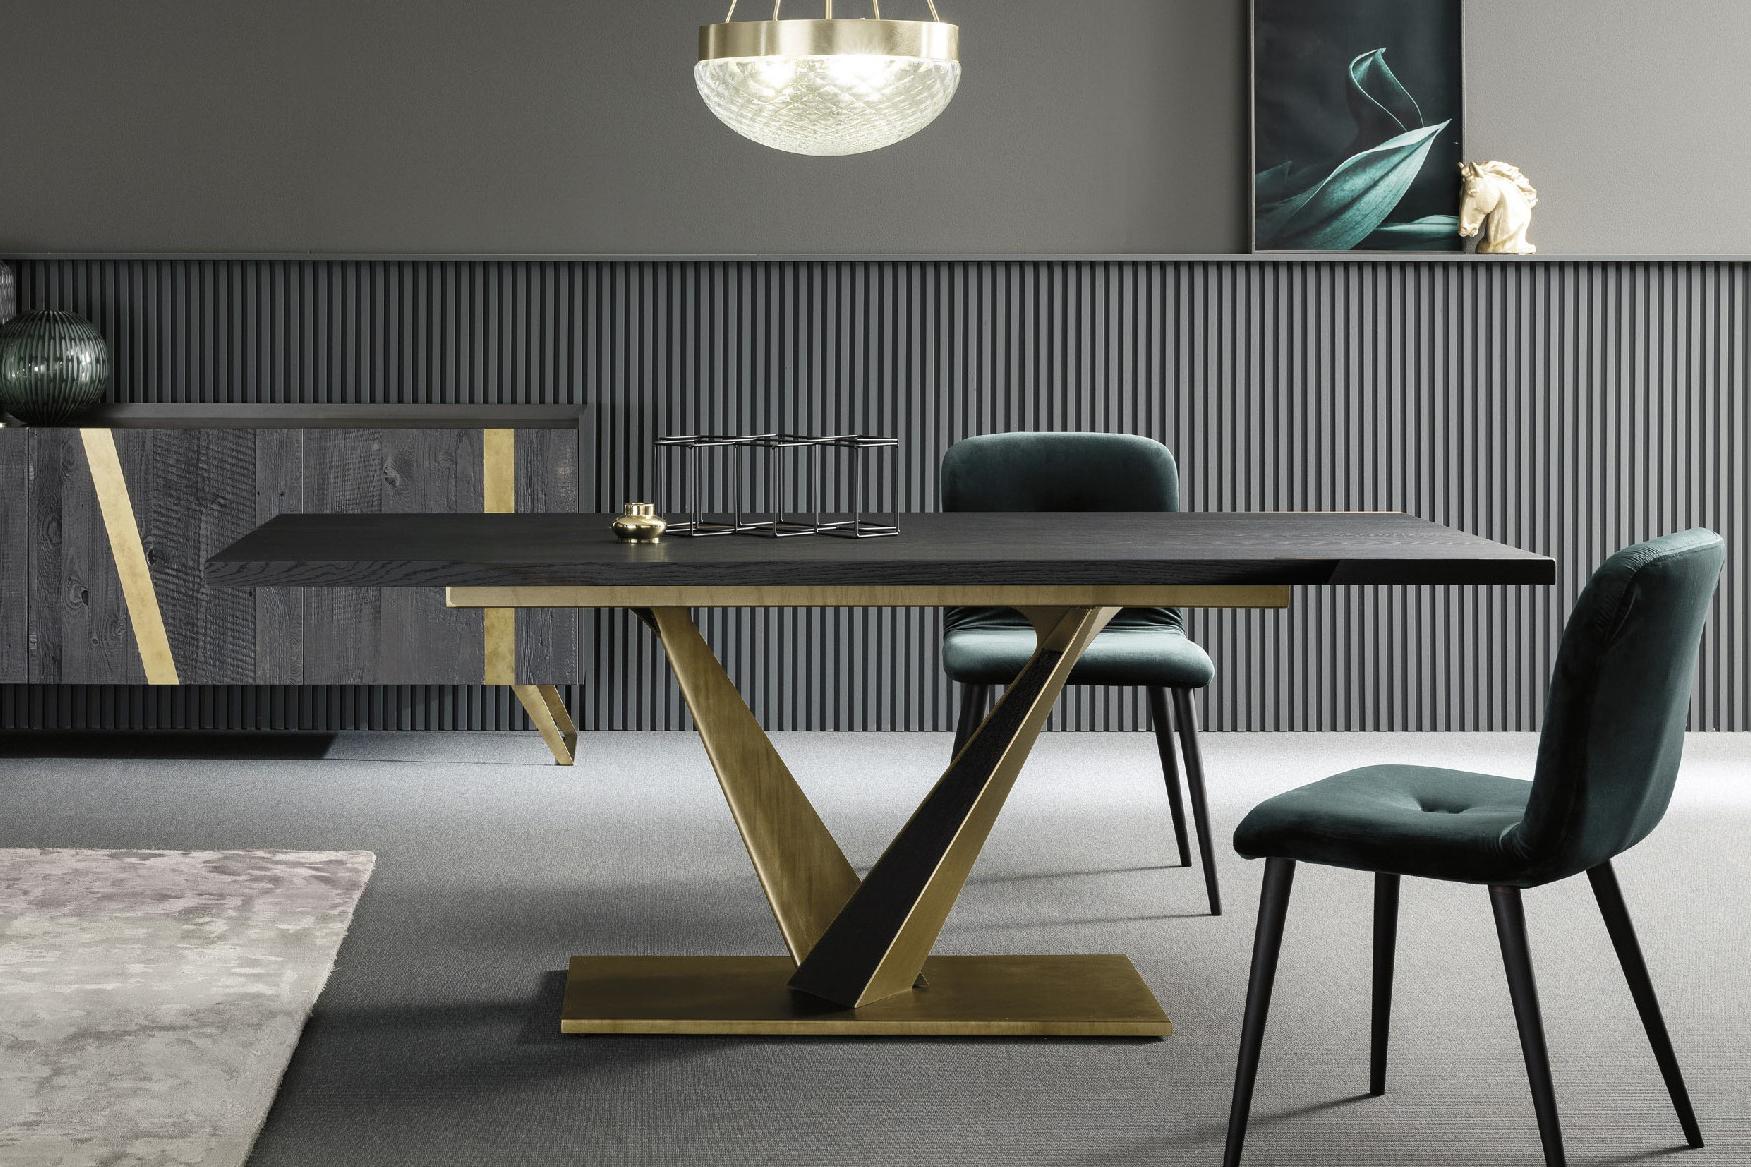 West dining table is an elegant contemporary addition to the living room. The sculptural metal base features bronzed angled metal supports filled with solid wood to match the tabletop. 

The tabletop, available in several kinds of wood and